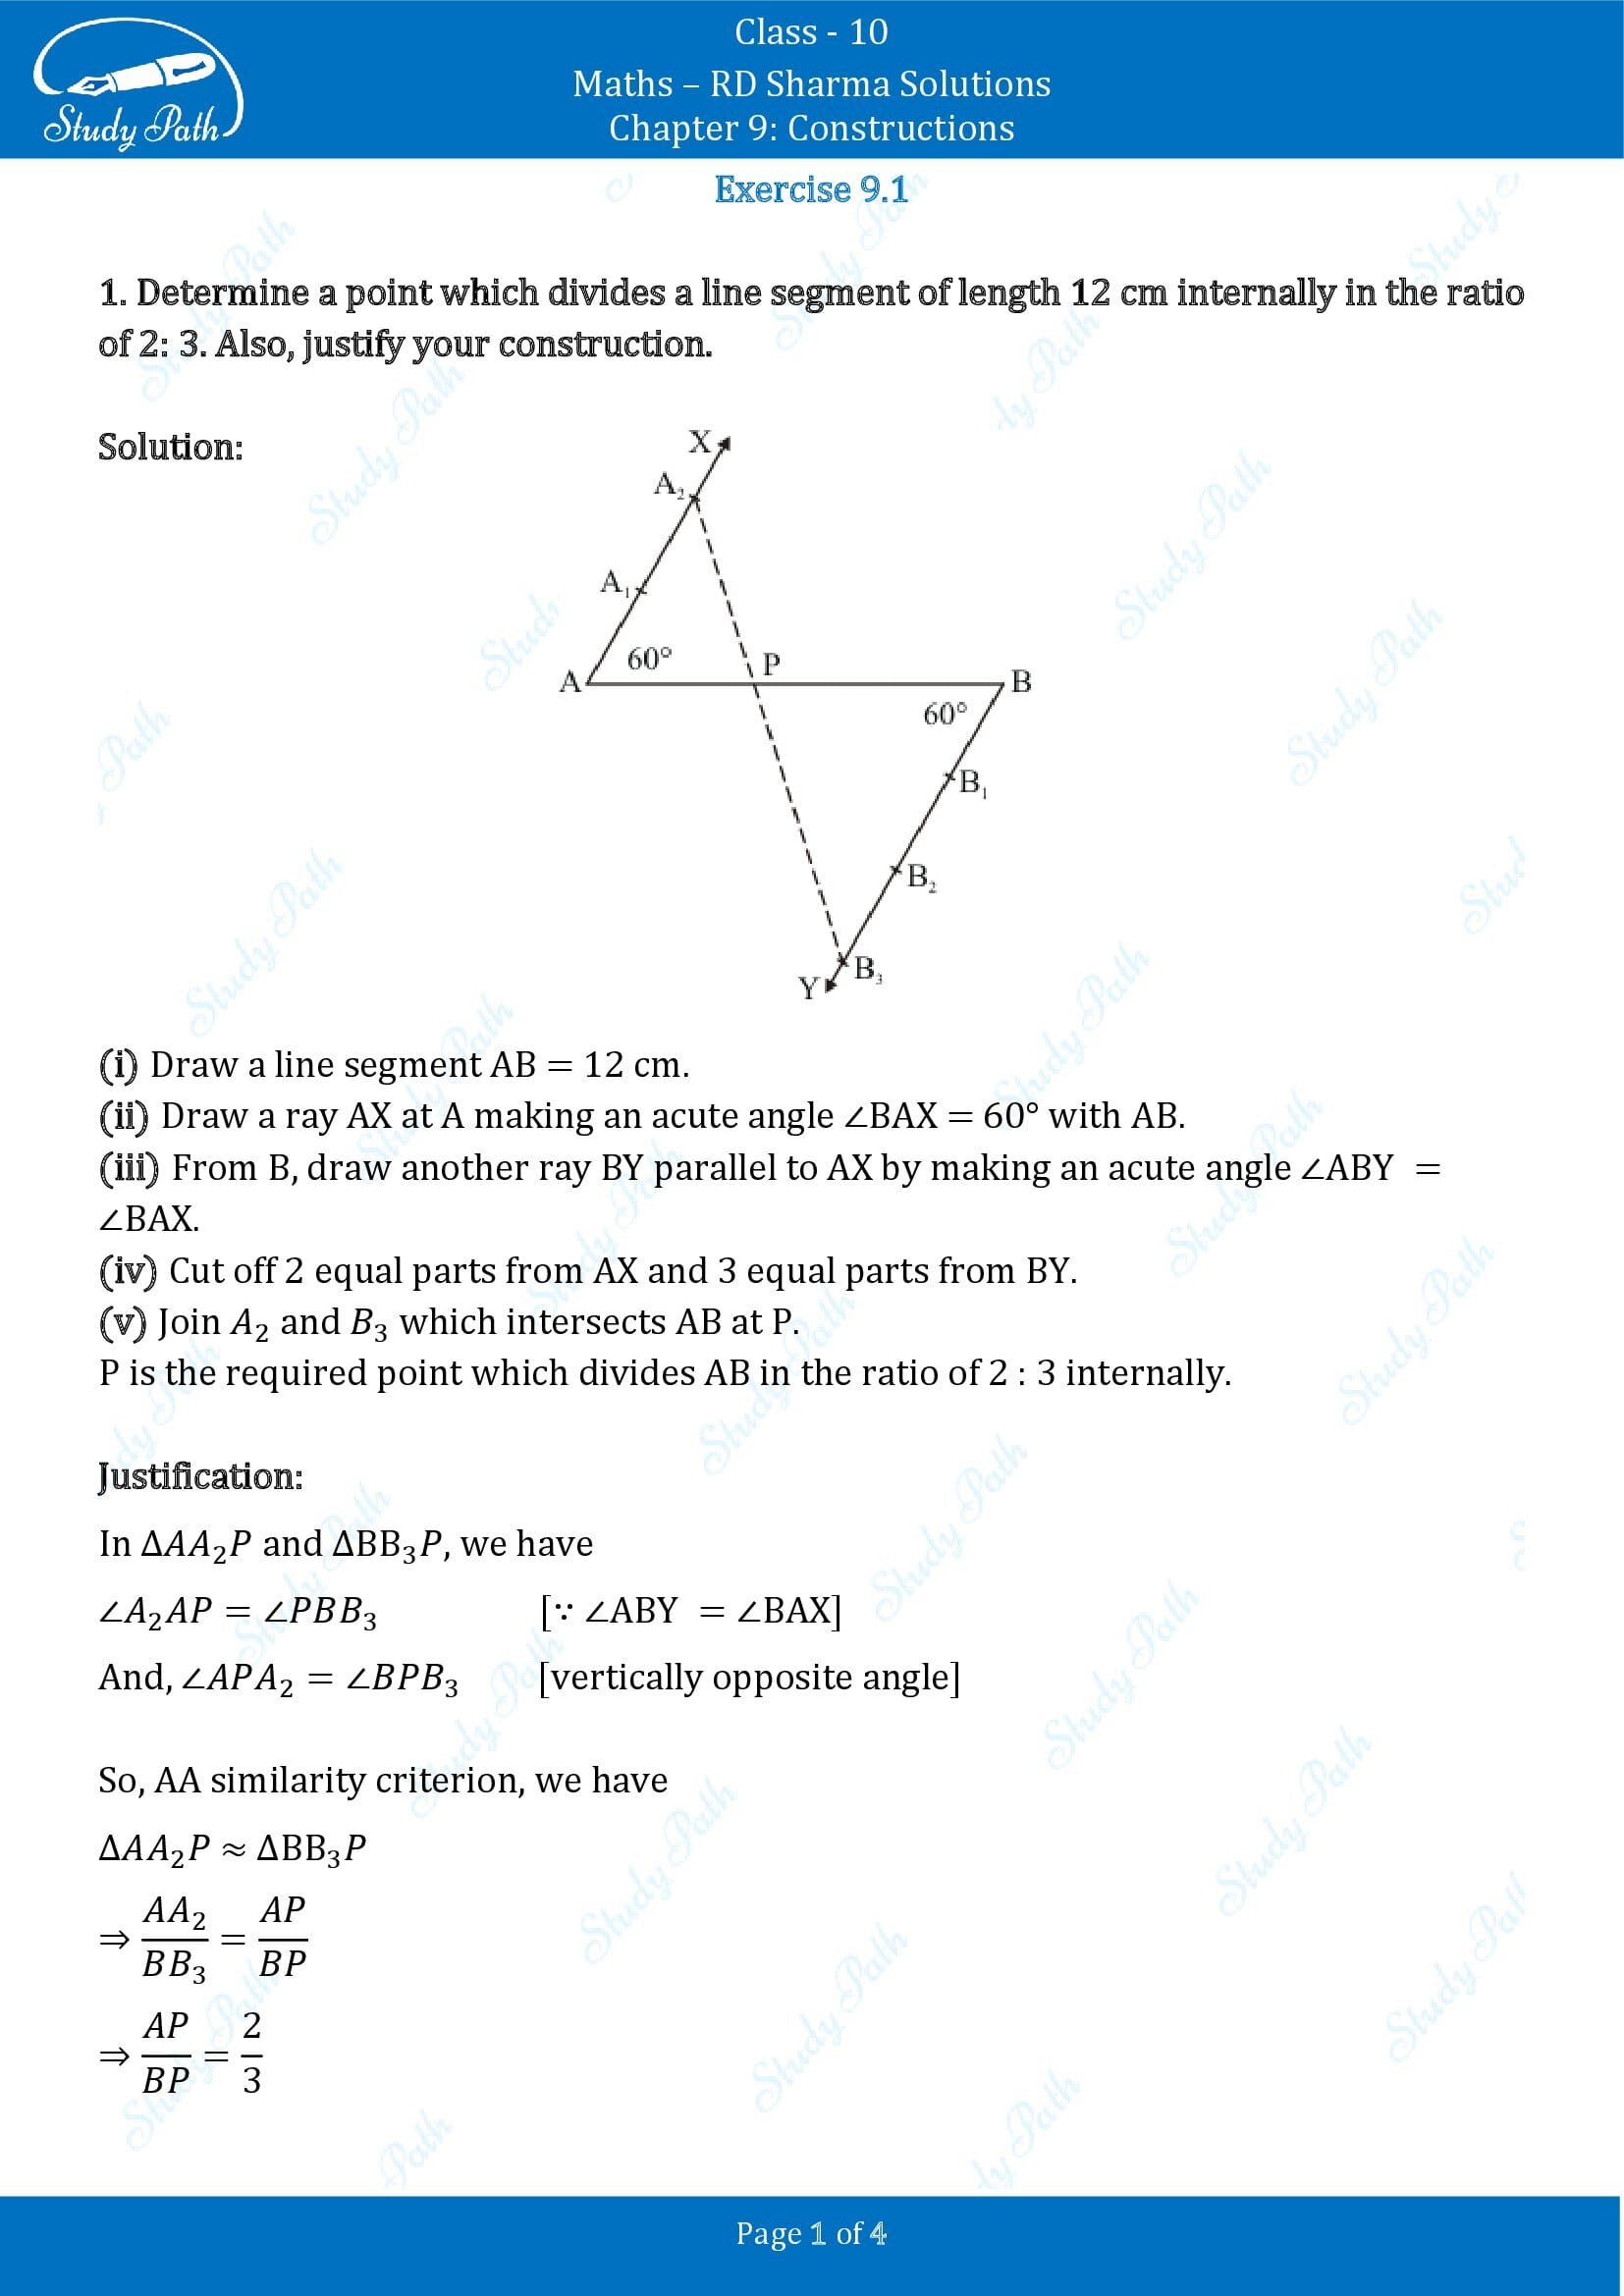 RD Sharma Solutions Class 10 Chapter 9 Constructions Exercise 9.1 00001